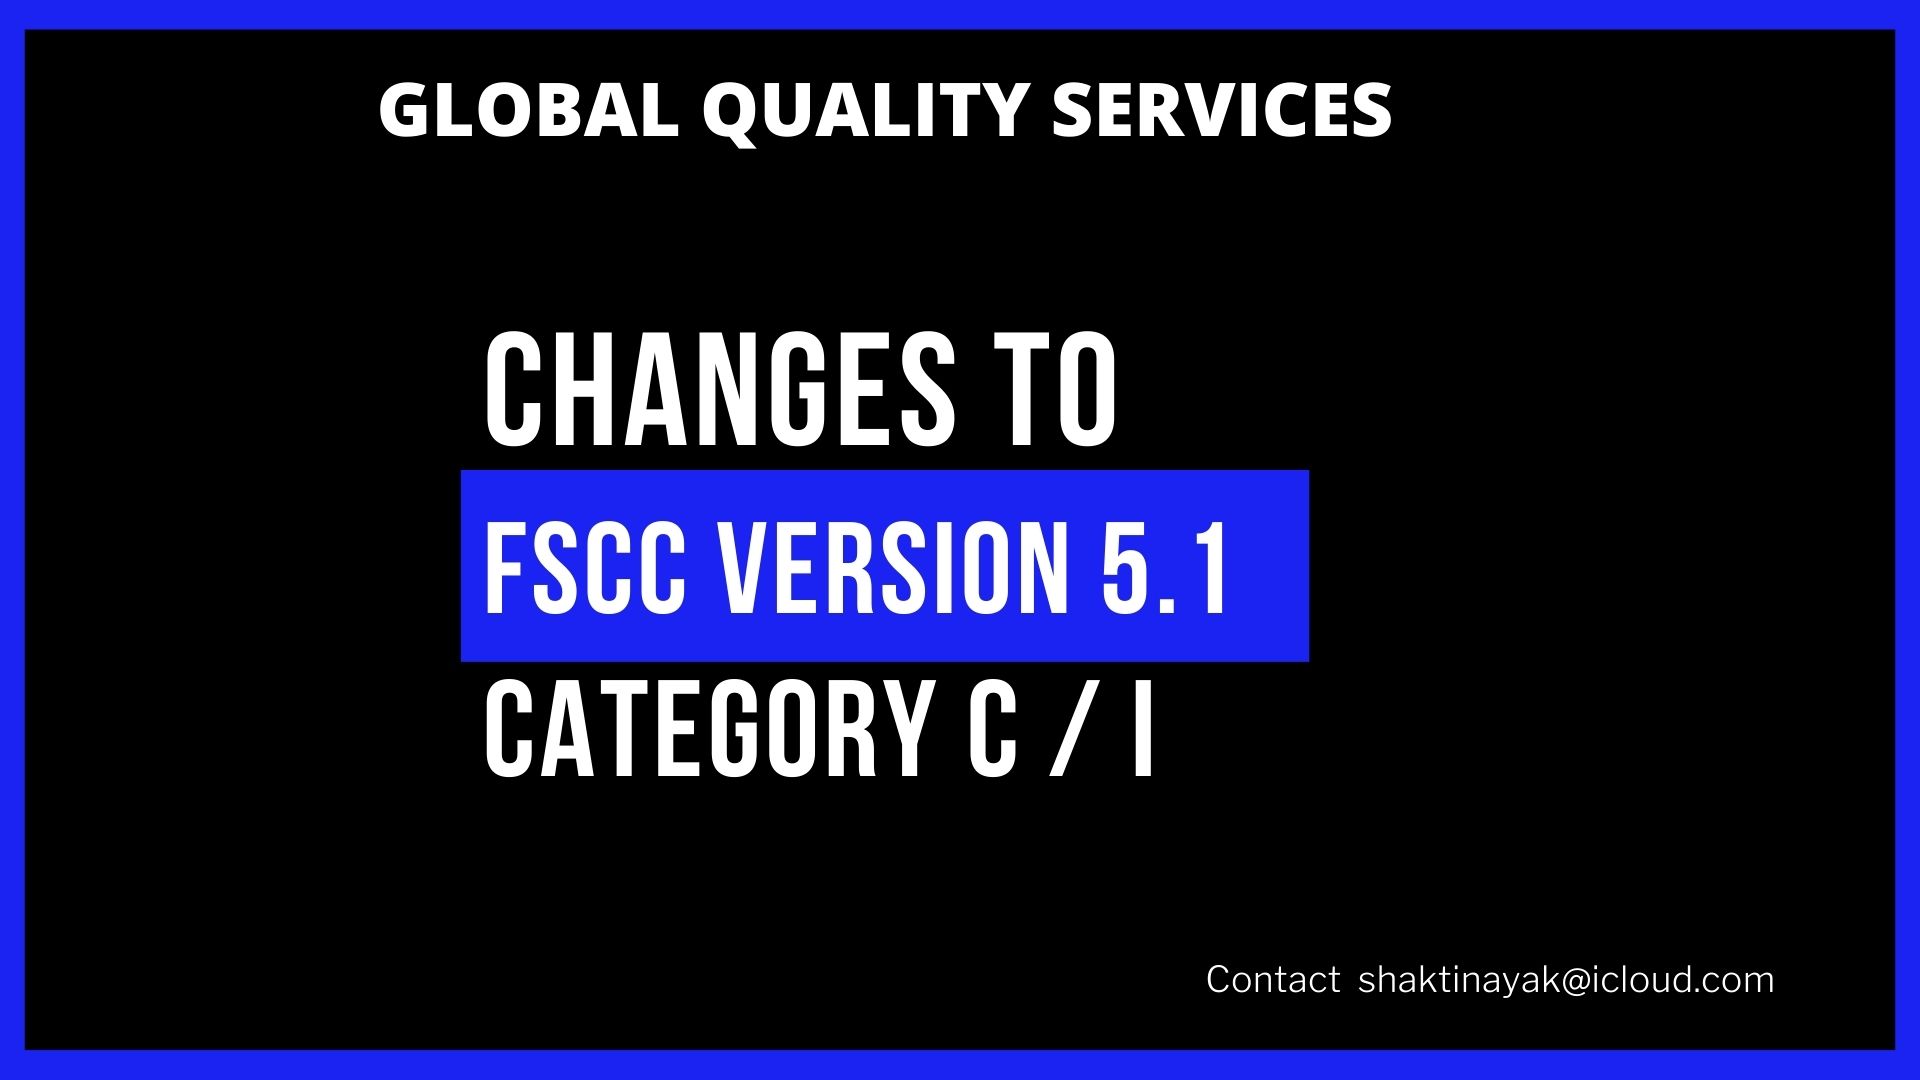 CHANGES TO FSCC VERSION 5.1 Category C / I